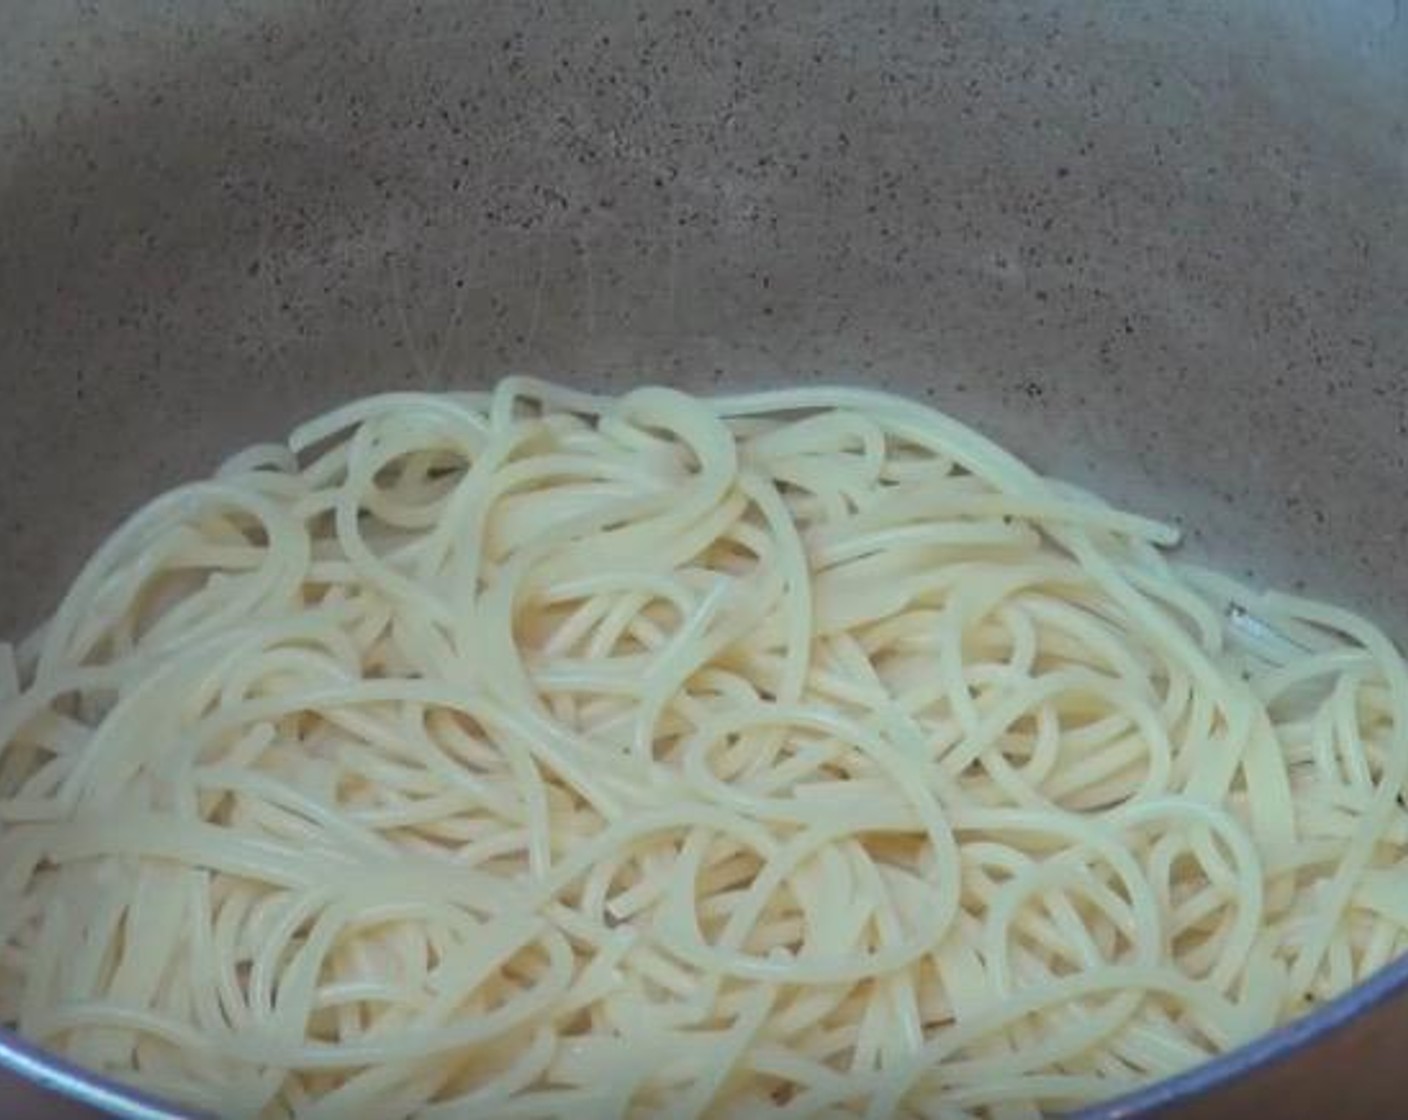 step 1 In a large pot of boiling water with Salt (to taste), add Spaghetti (9 oz). Cook for 10 minutes, or until the pasta is tender. Drain and return to pot.